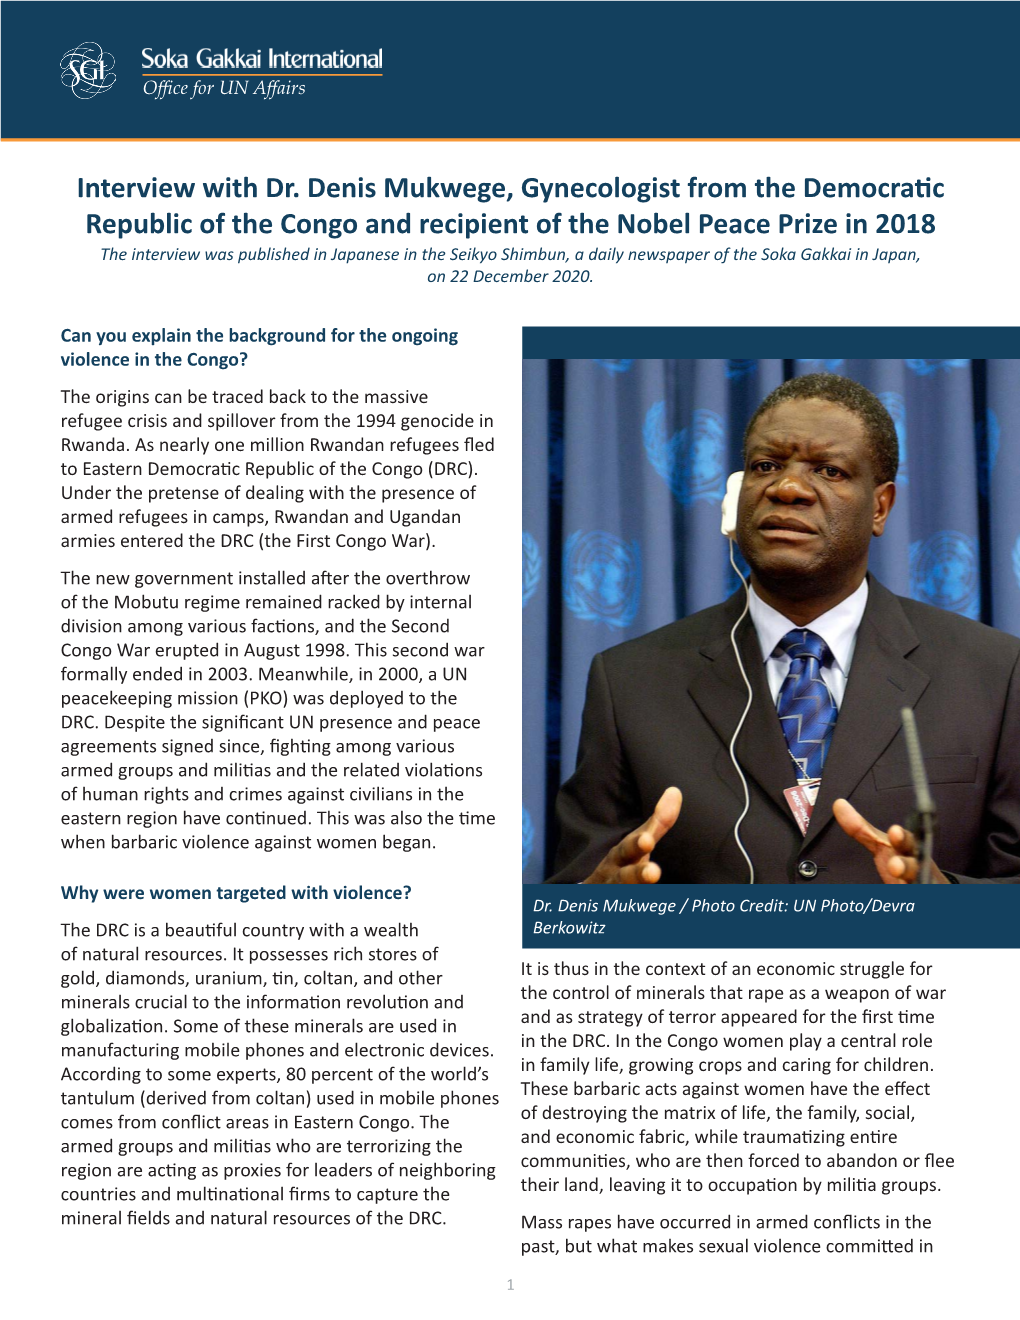 Interview with Dr. Denis Mukwege, Gynecologist from the Democratic